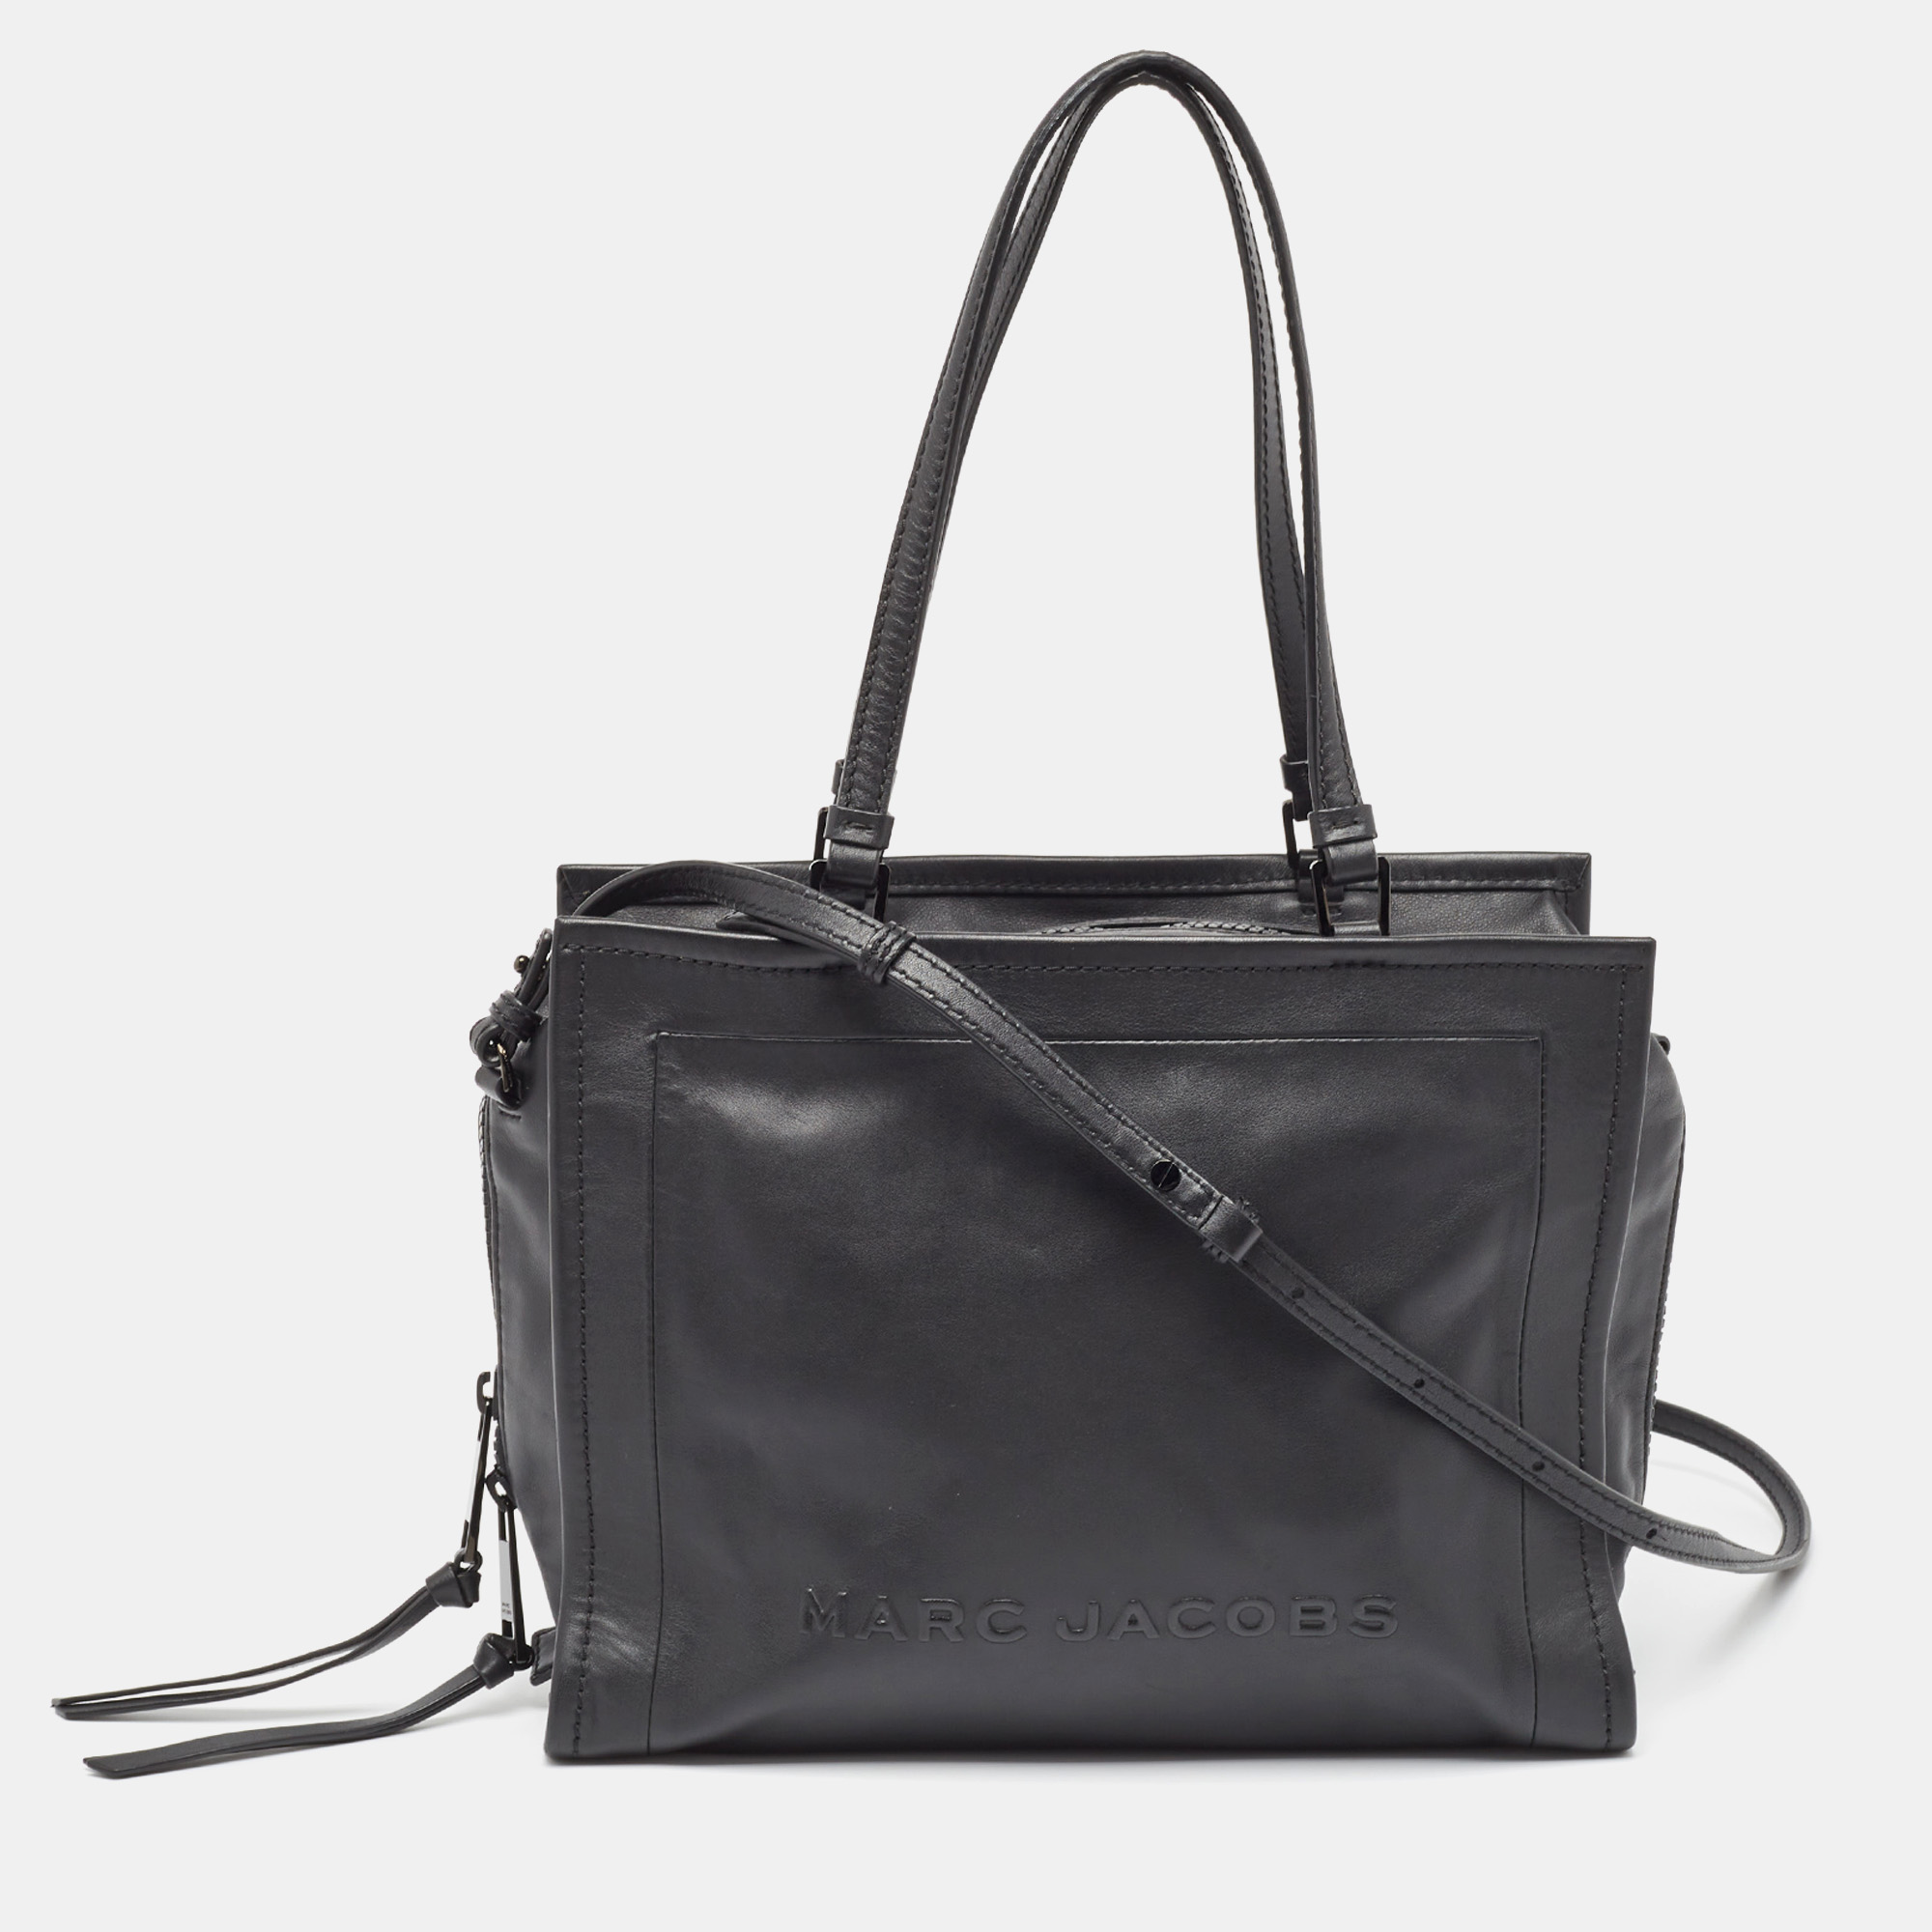 

Marc Jacobs Black Leather The Box Shopper Tote